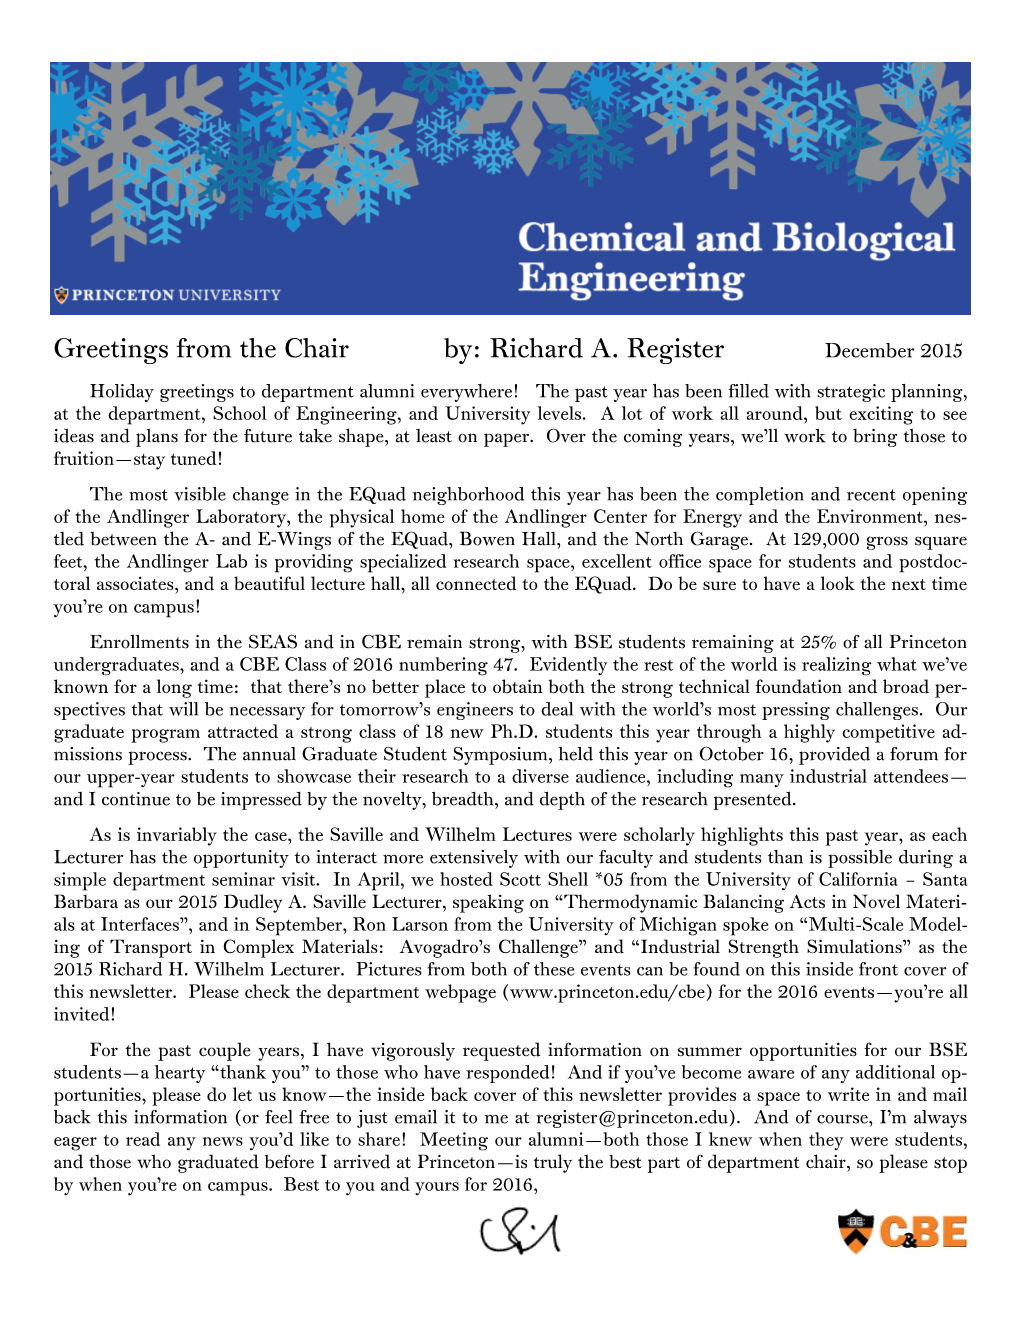 Greetings from the Chair By: Richard A. Register December 2015